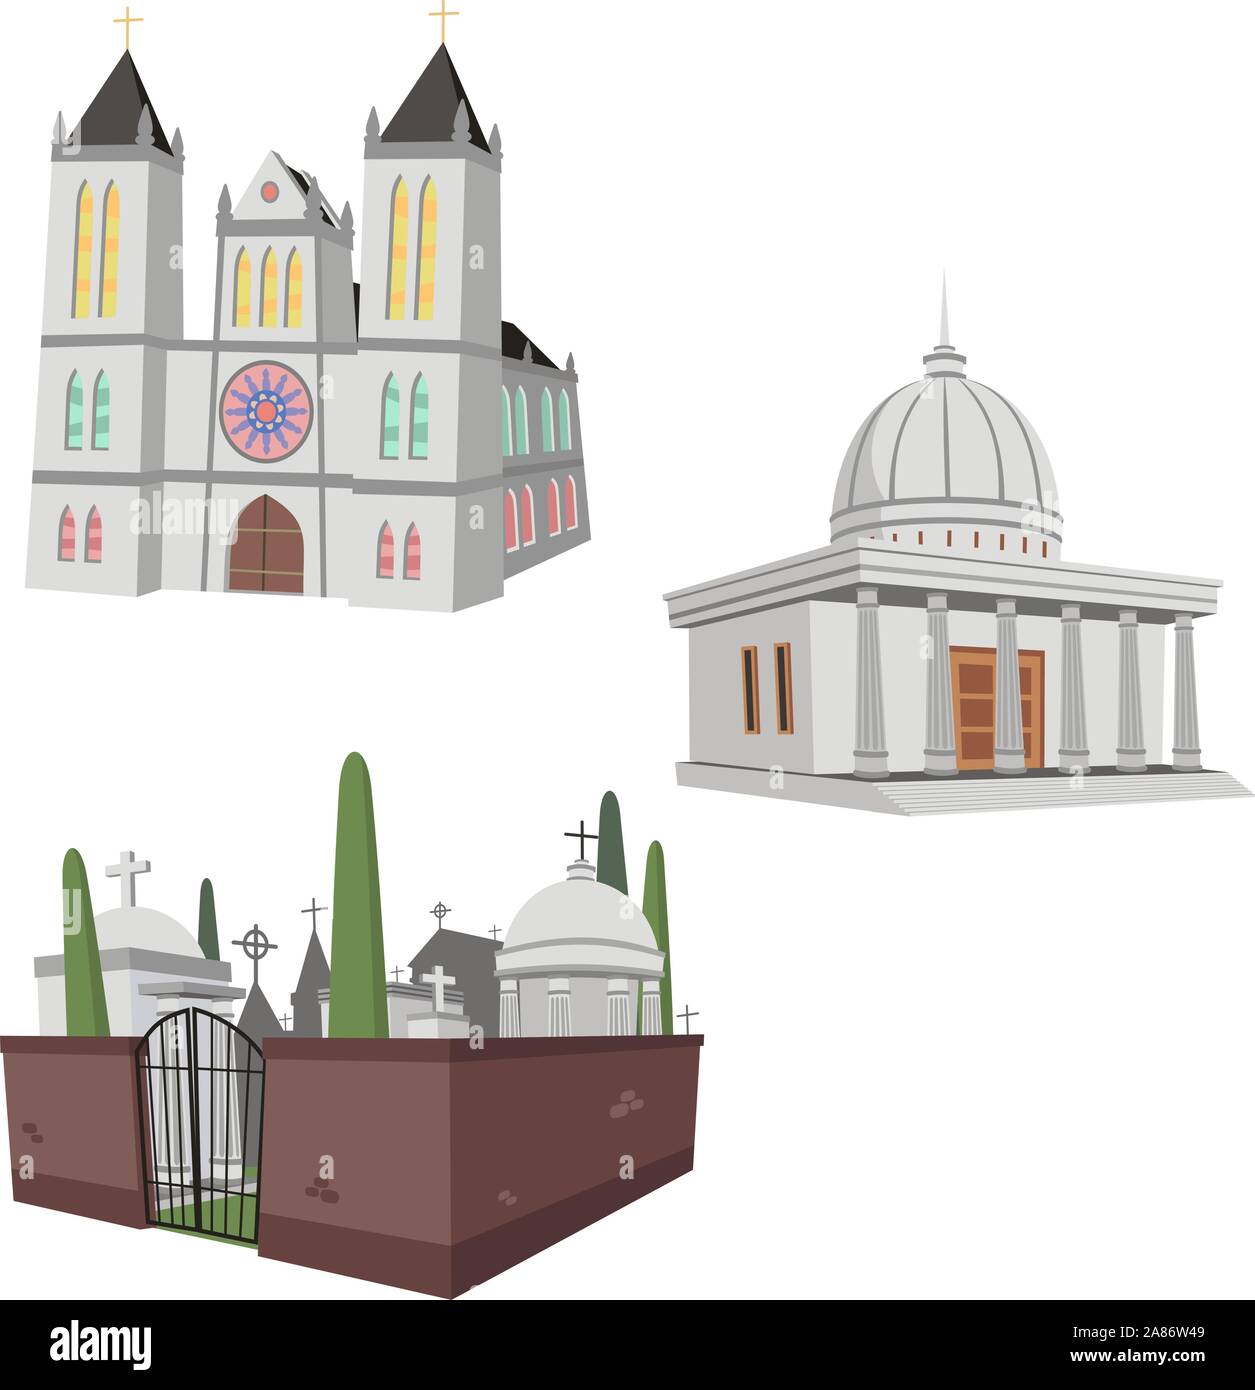 Illustration of 3 public buildings including a cathedral, cemetery and a generic public construction. Stock Vector